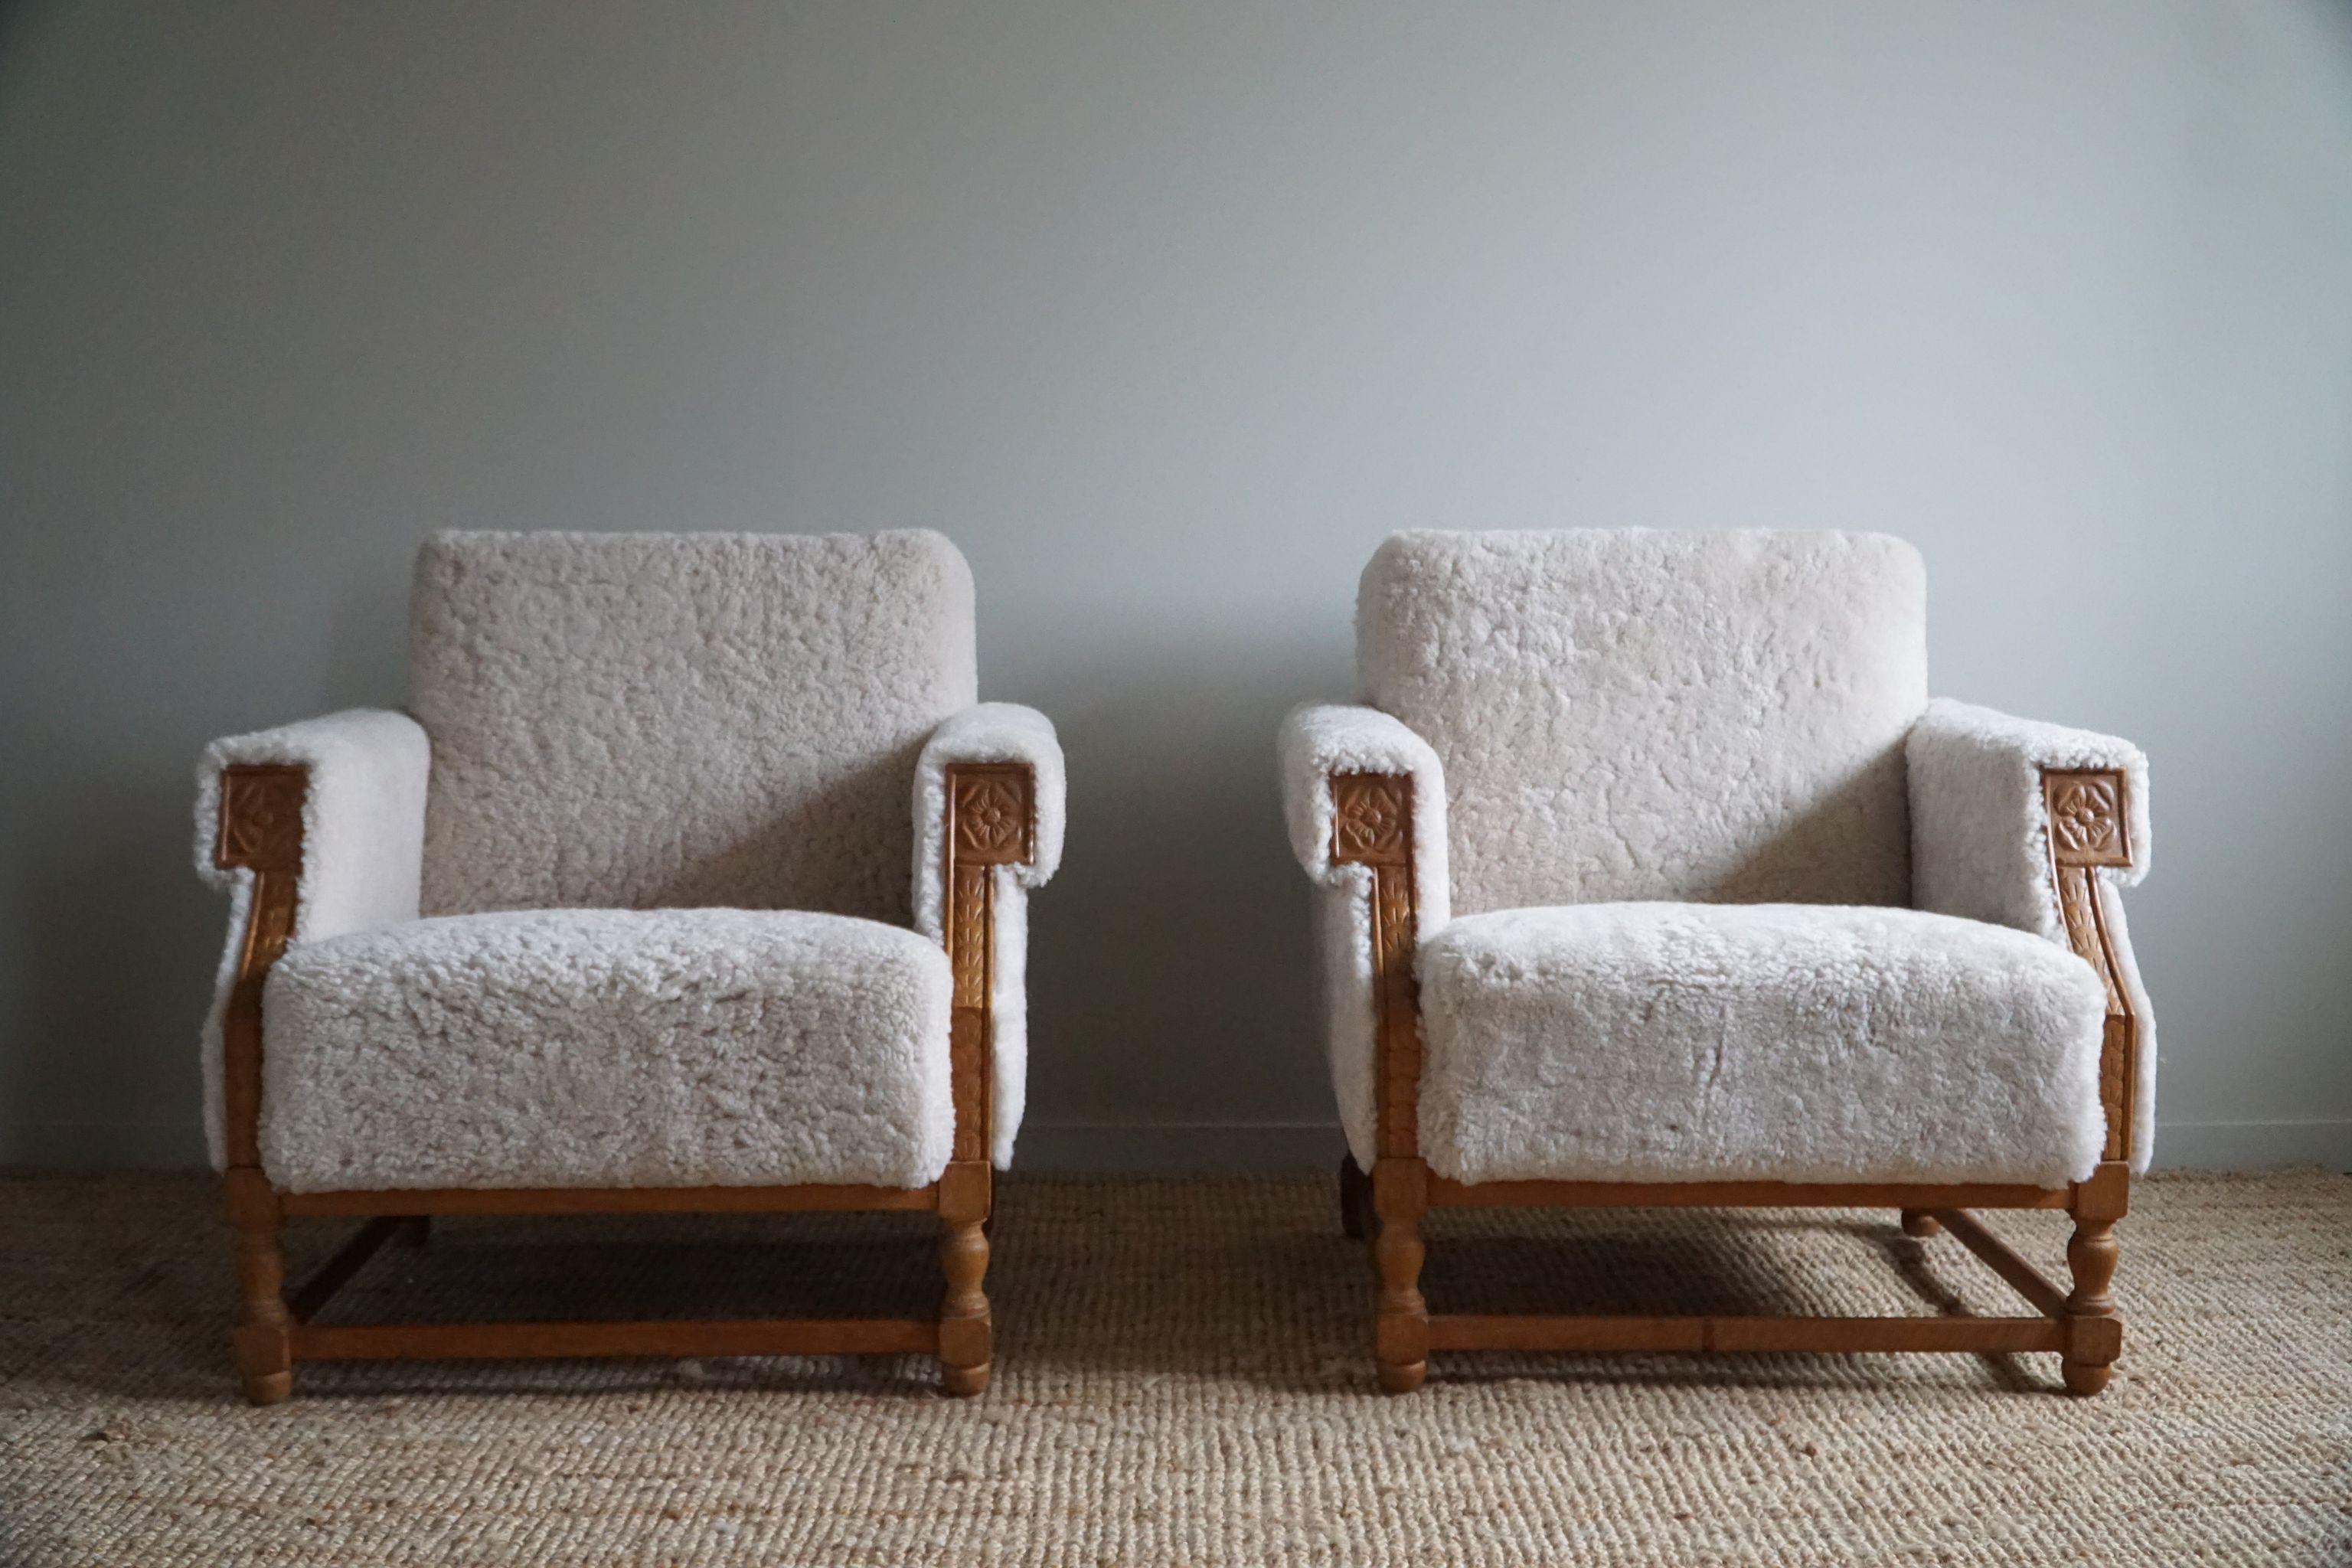 Pair of Danish Mid-Century Modern Lounge Chairs in Shearling Lambswool, 1950s 10